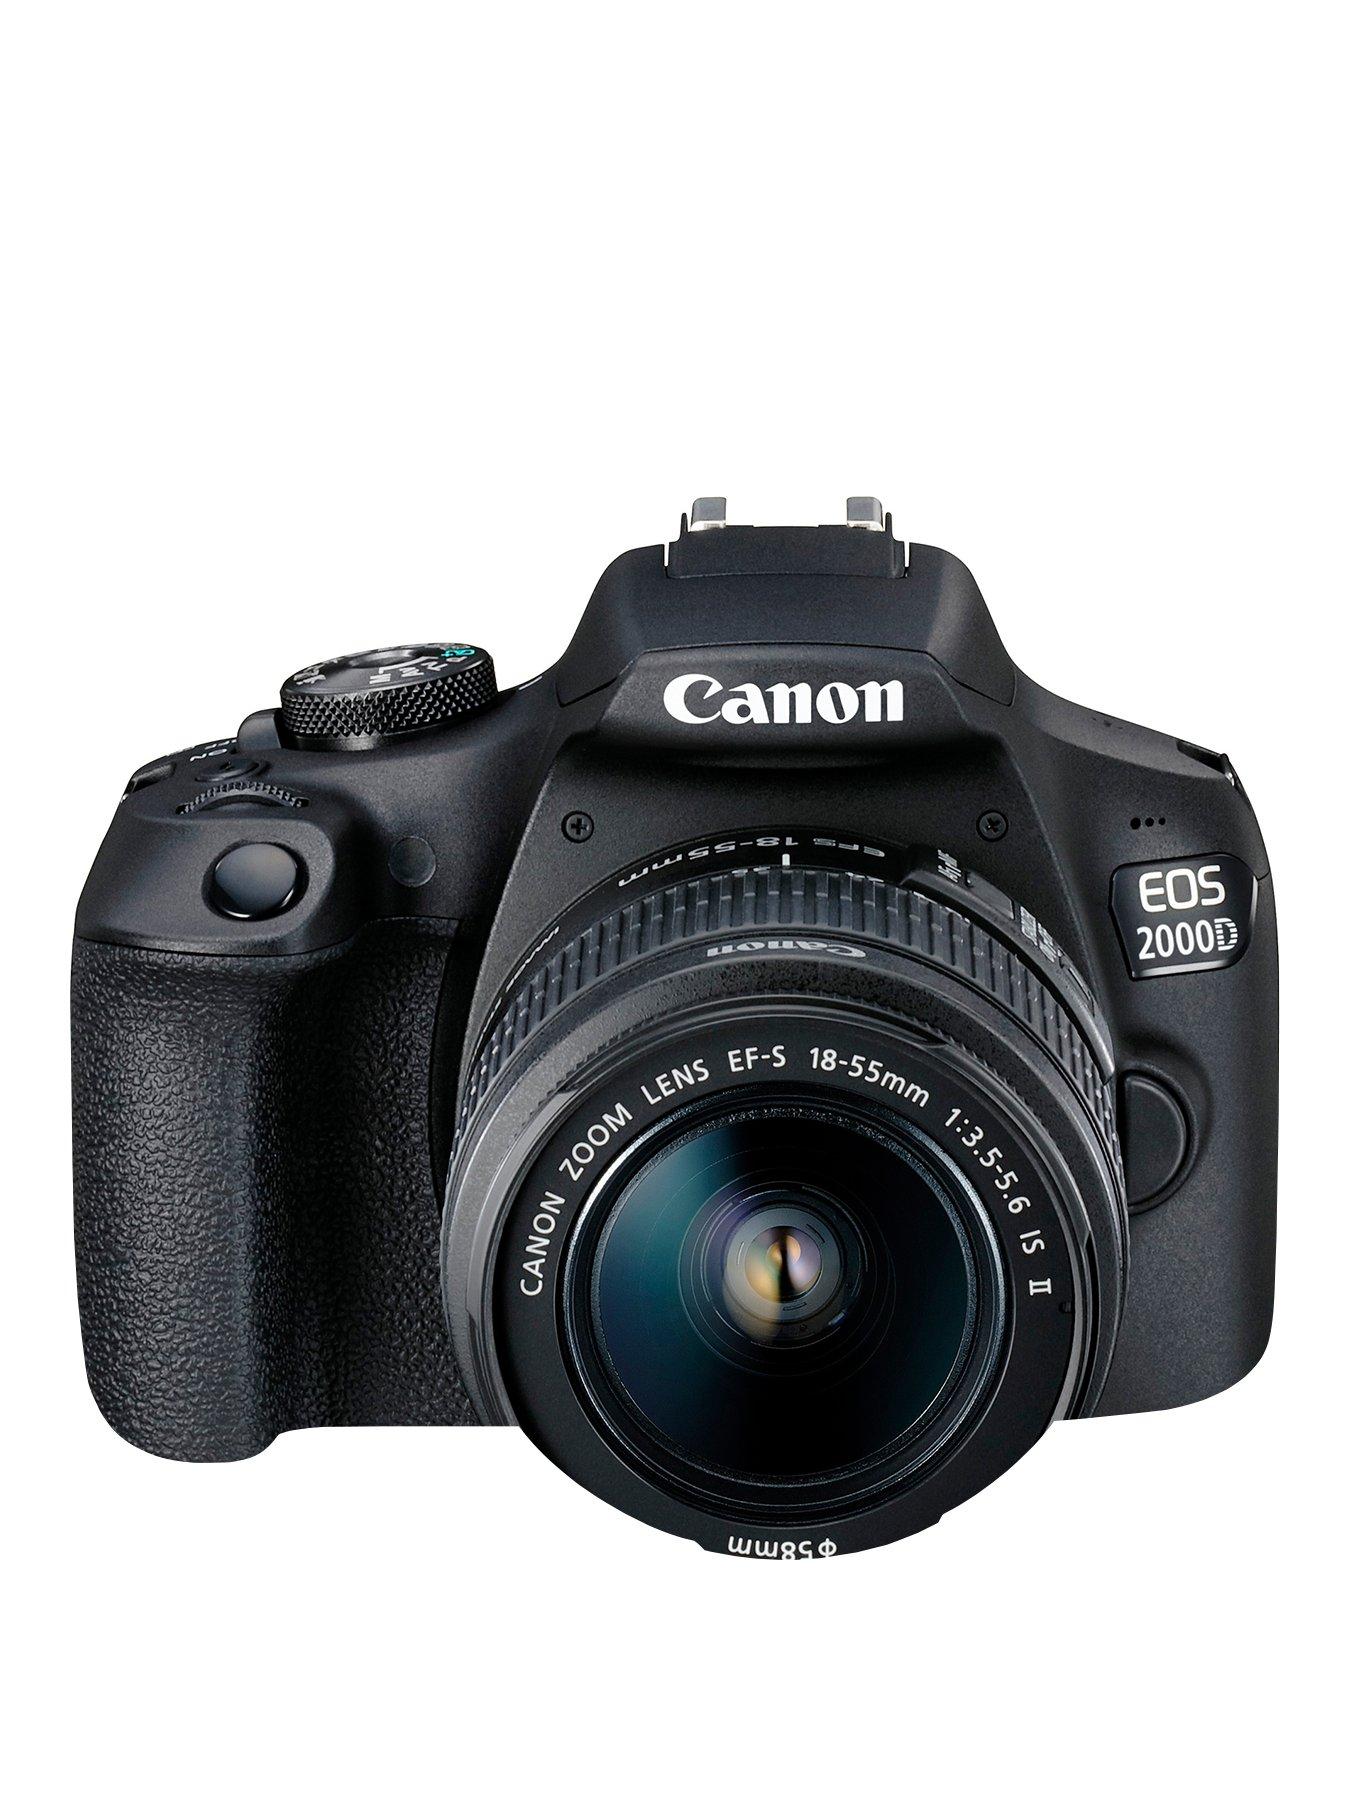 Canon Eos 2000D Slr Camera With Ef-S 18-55Mm Is Ii Lens Kit